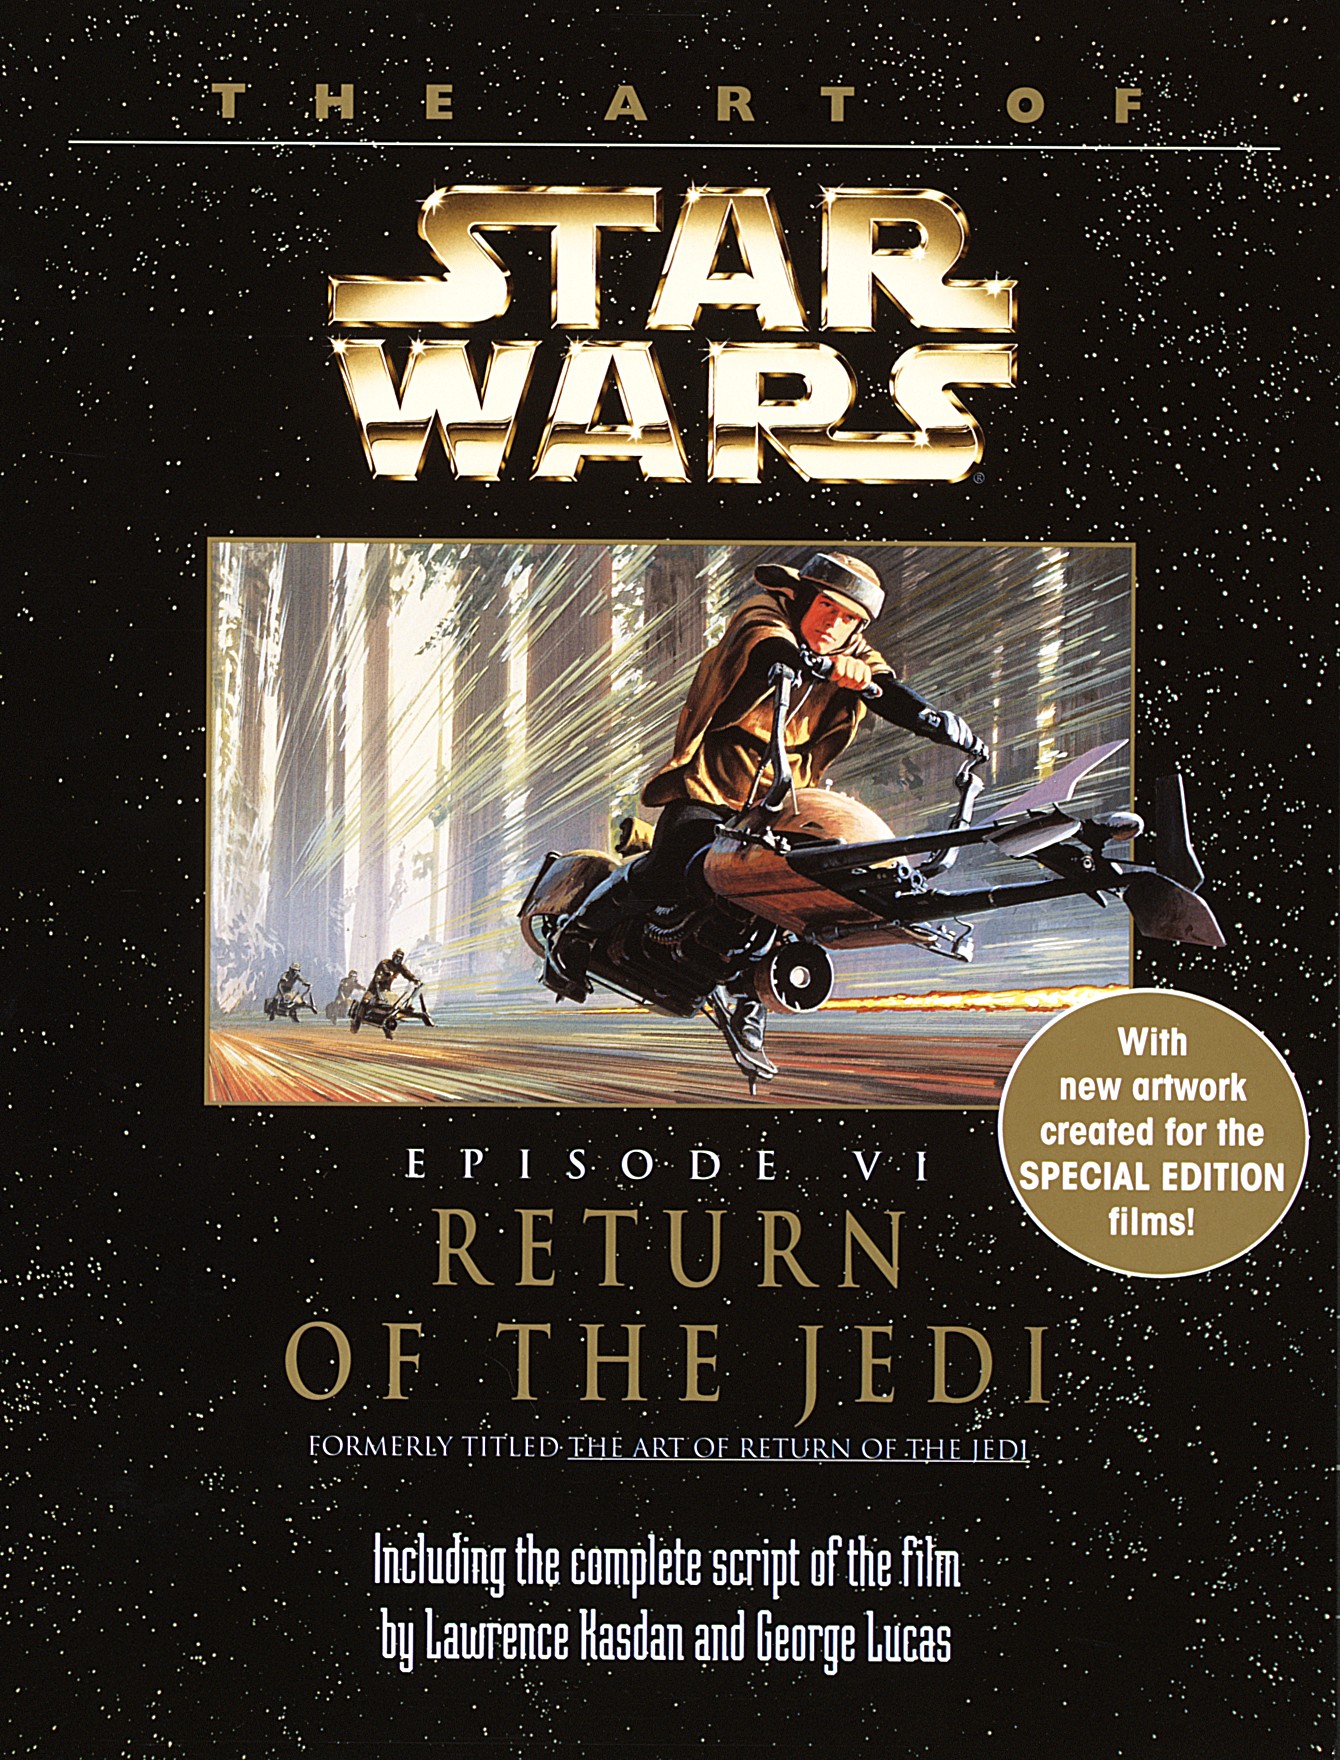 Star Wars Episode VI: Return Of The Jedi  Backgrounds, Compatible - PC, Mobile, Gadgets| 1340x1760 px